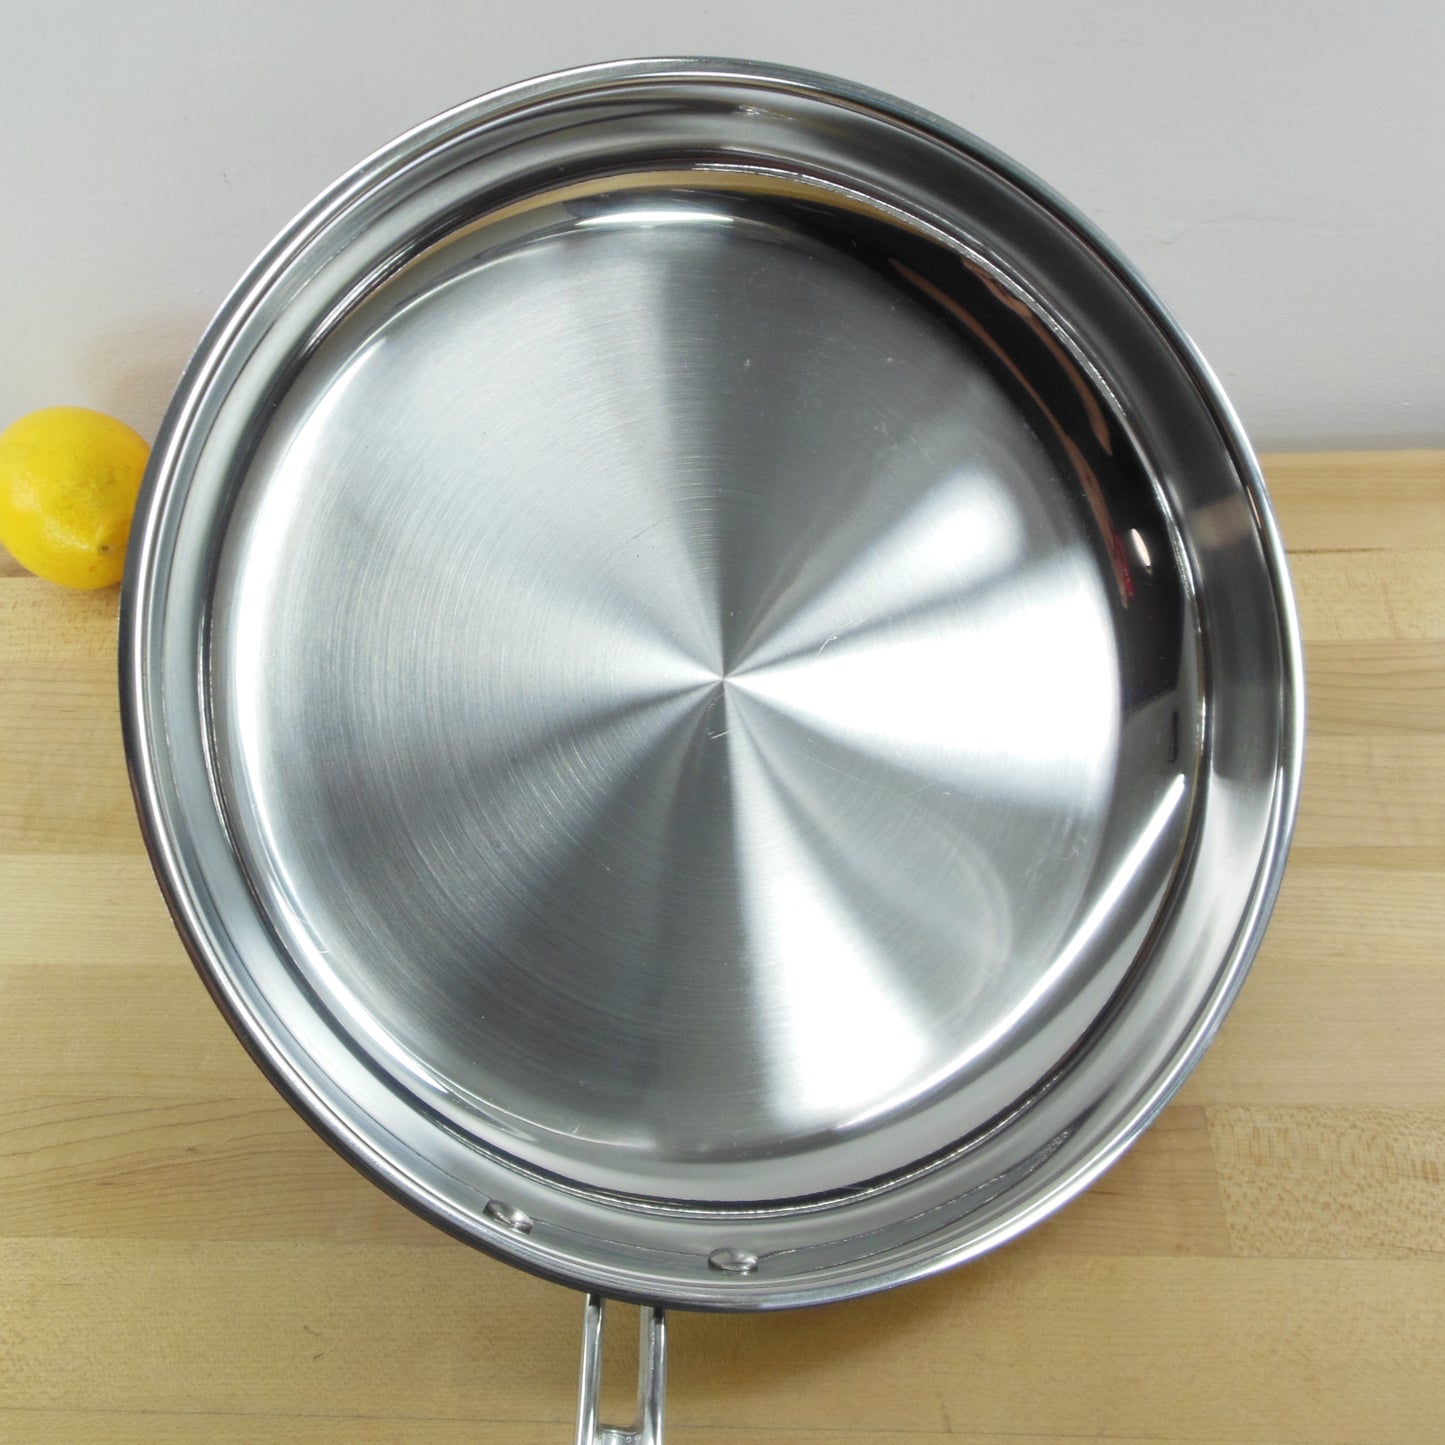 Cuisinart Induction Ready Stainless 12" Fry Pan Skillet 73122-30 Used